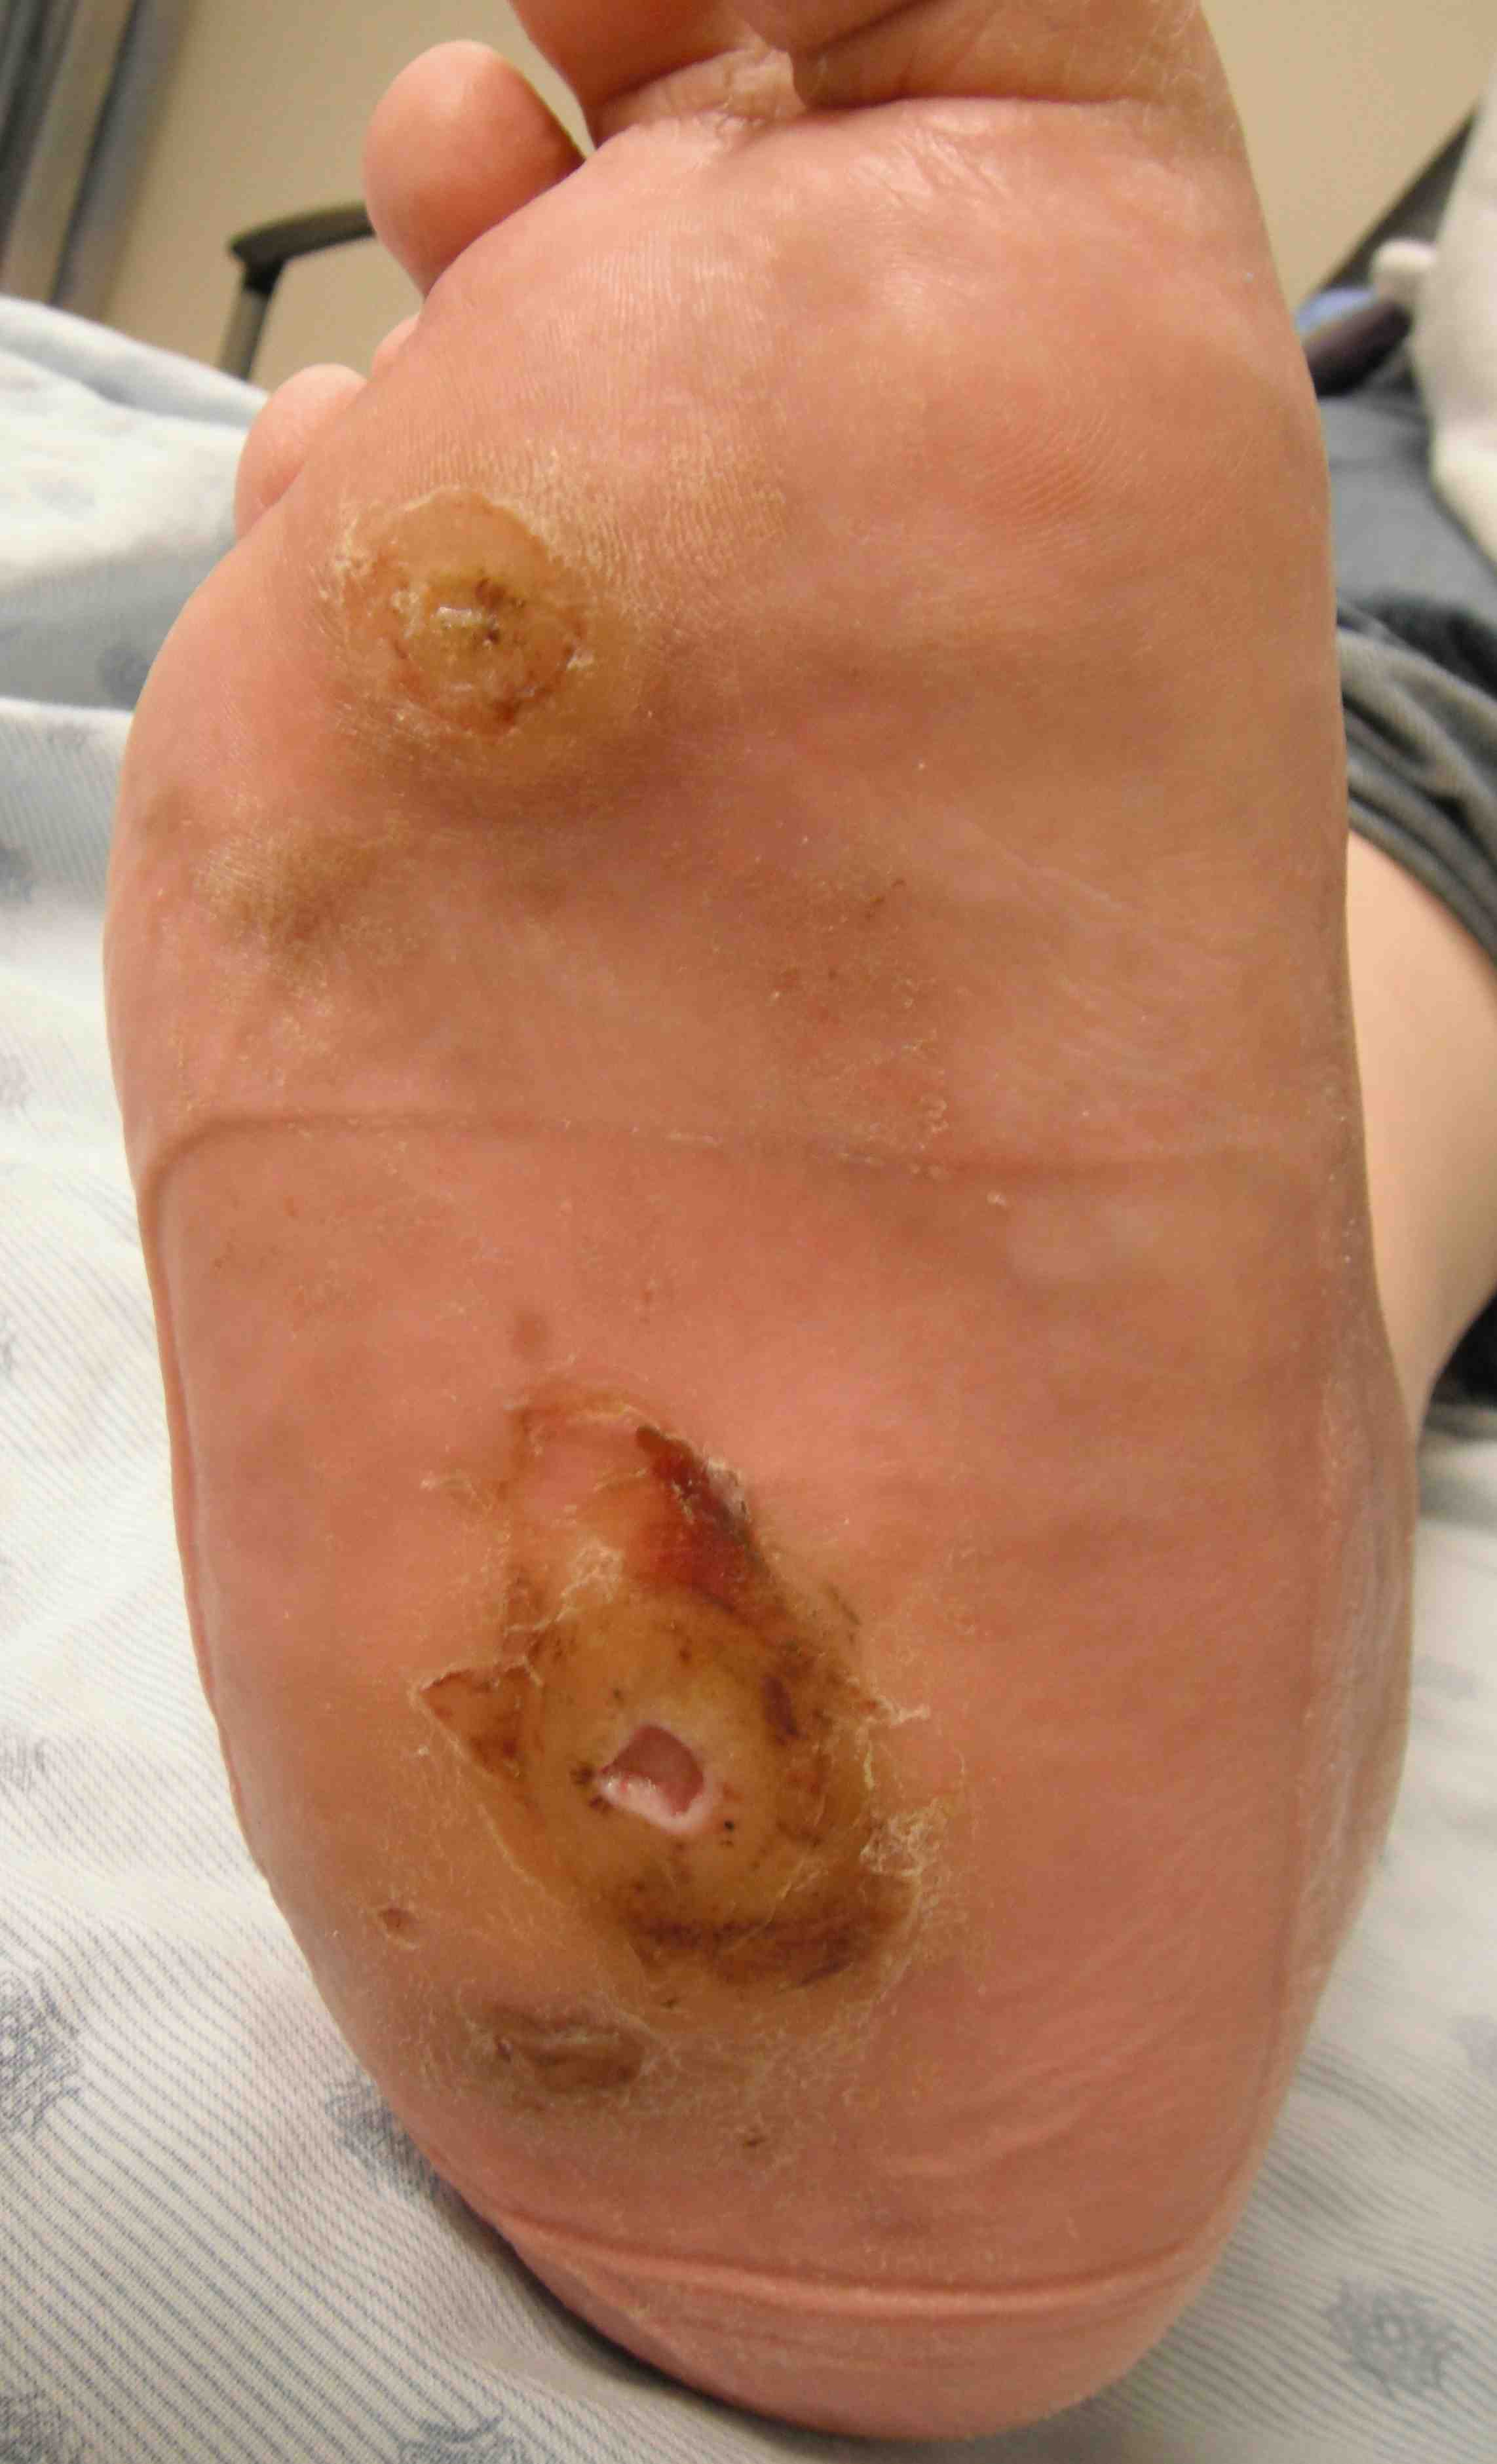 Neuropathic Ulcers from midfoot collapse